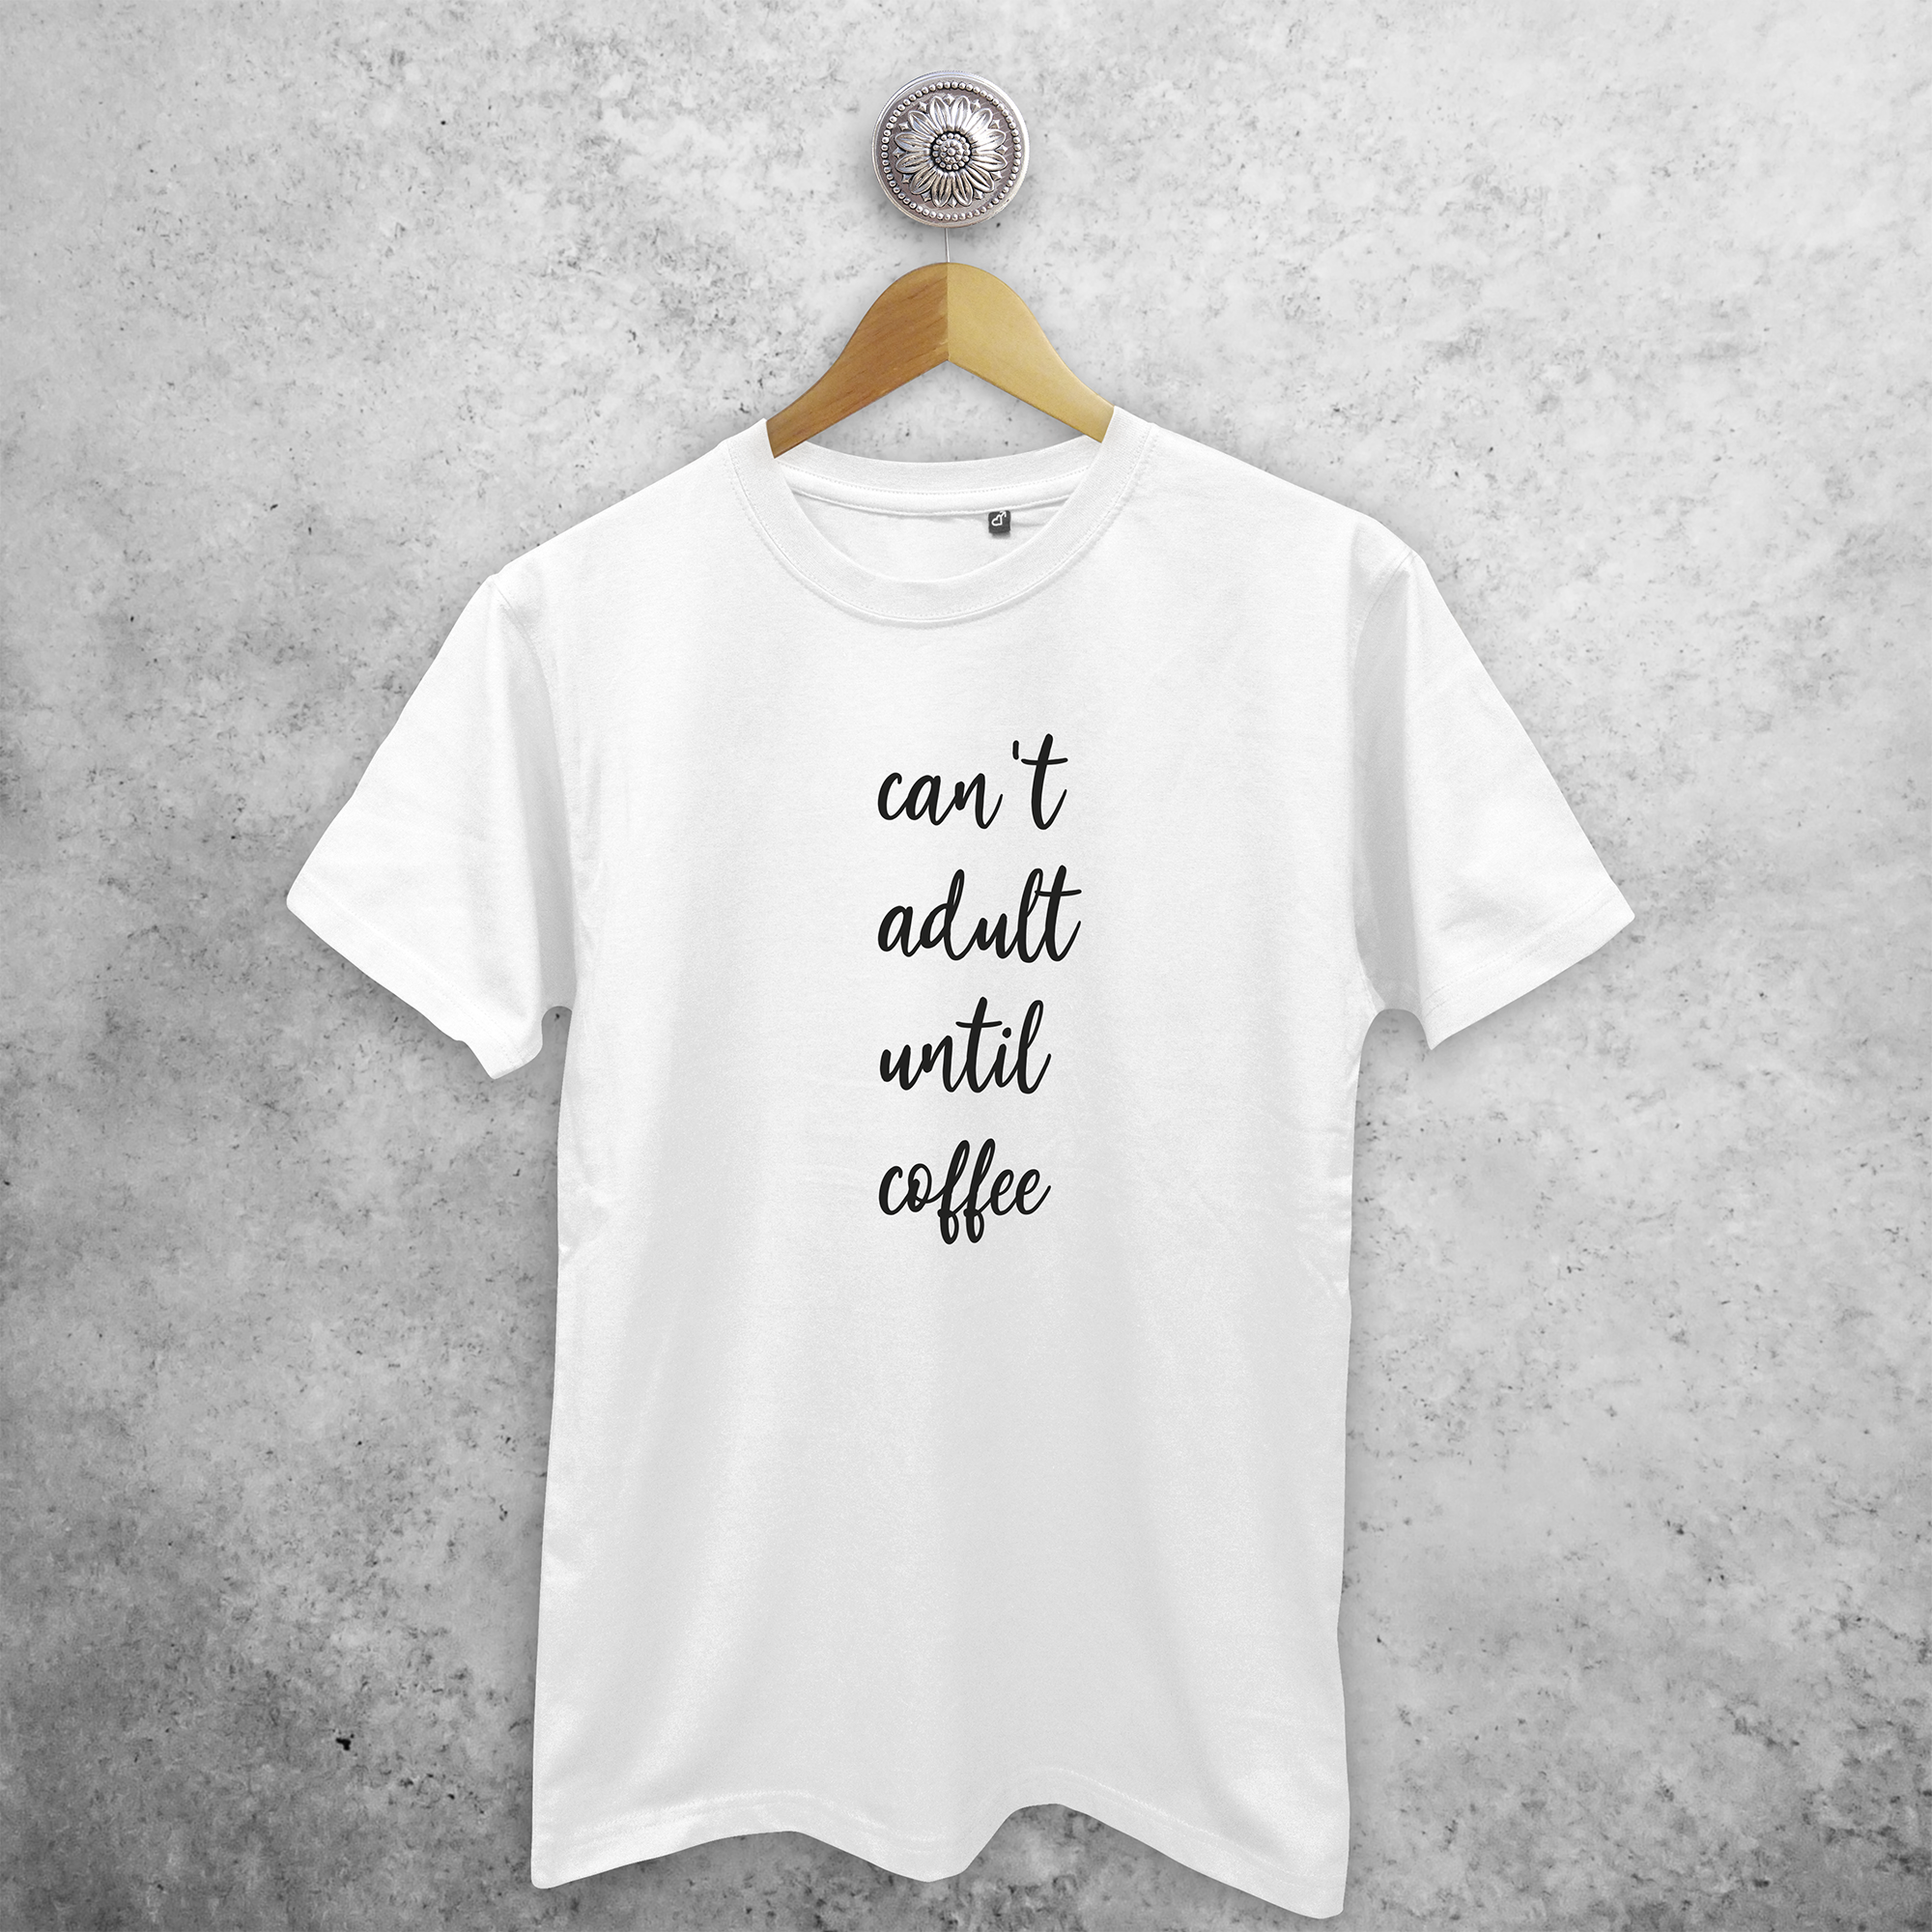 'Can't adult until coffee' adult shirt